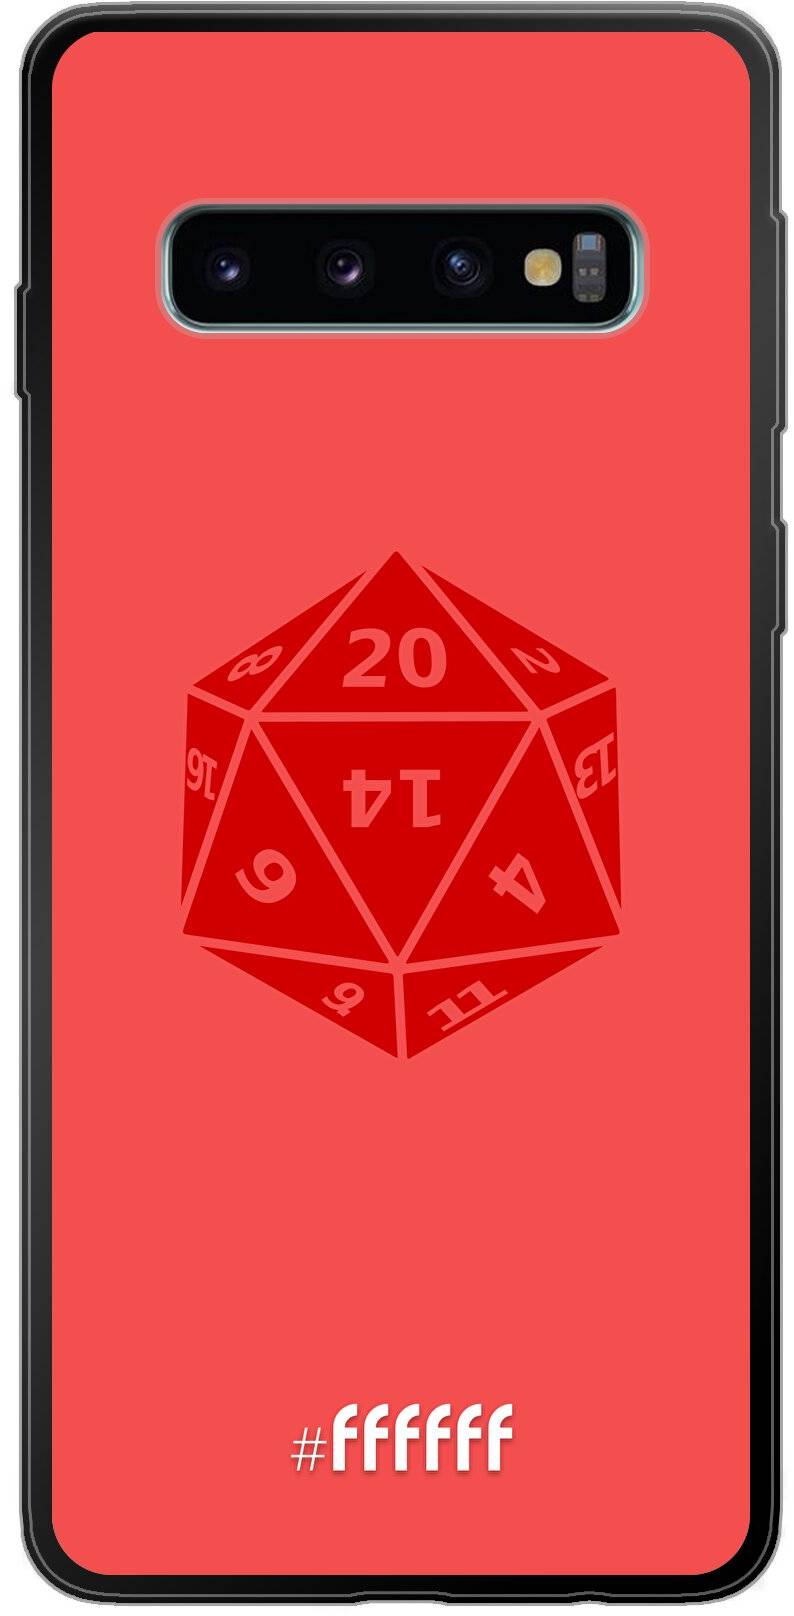 D20 - Red Galaxy S10